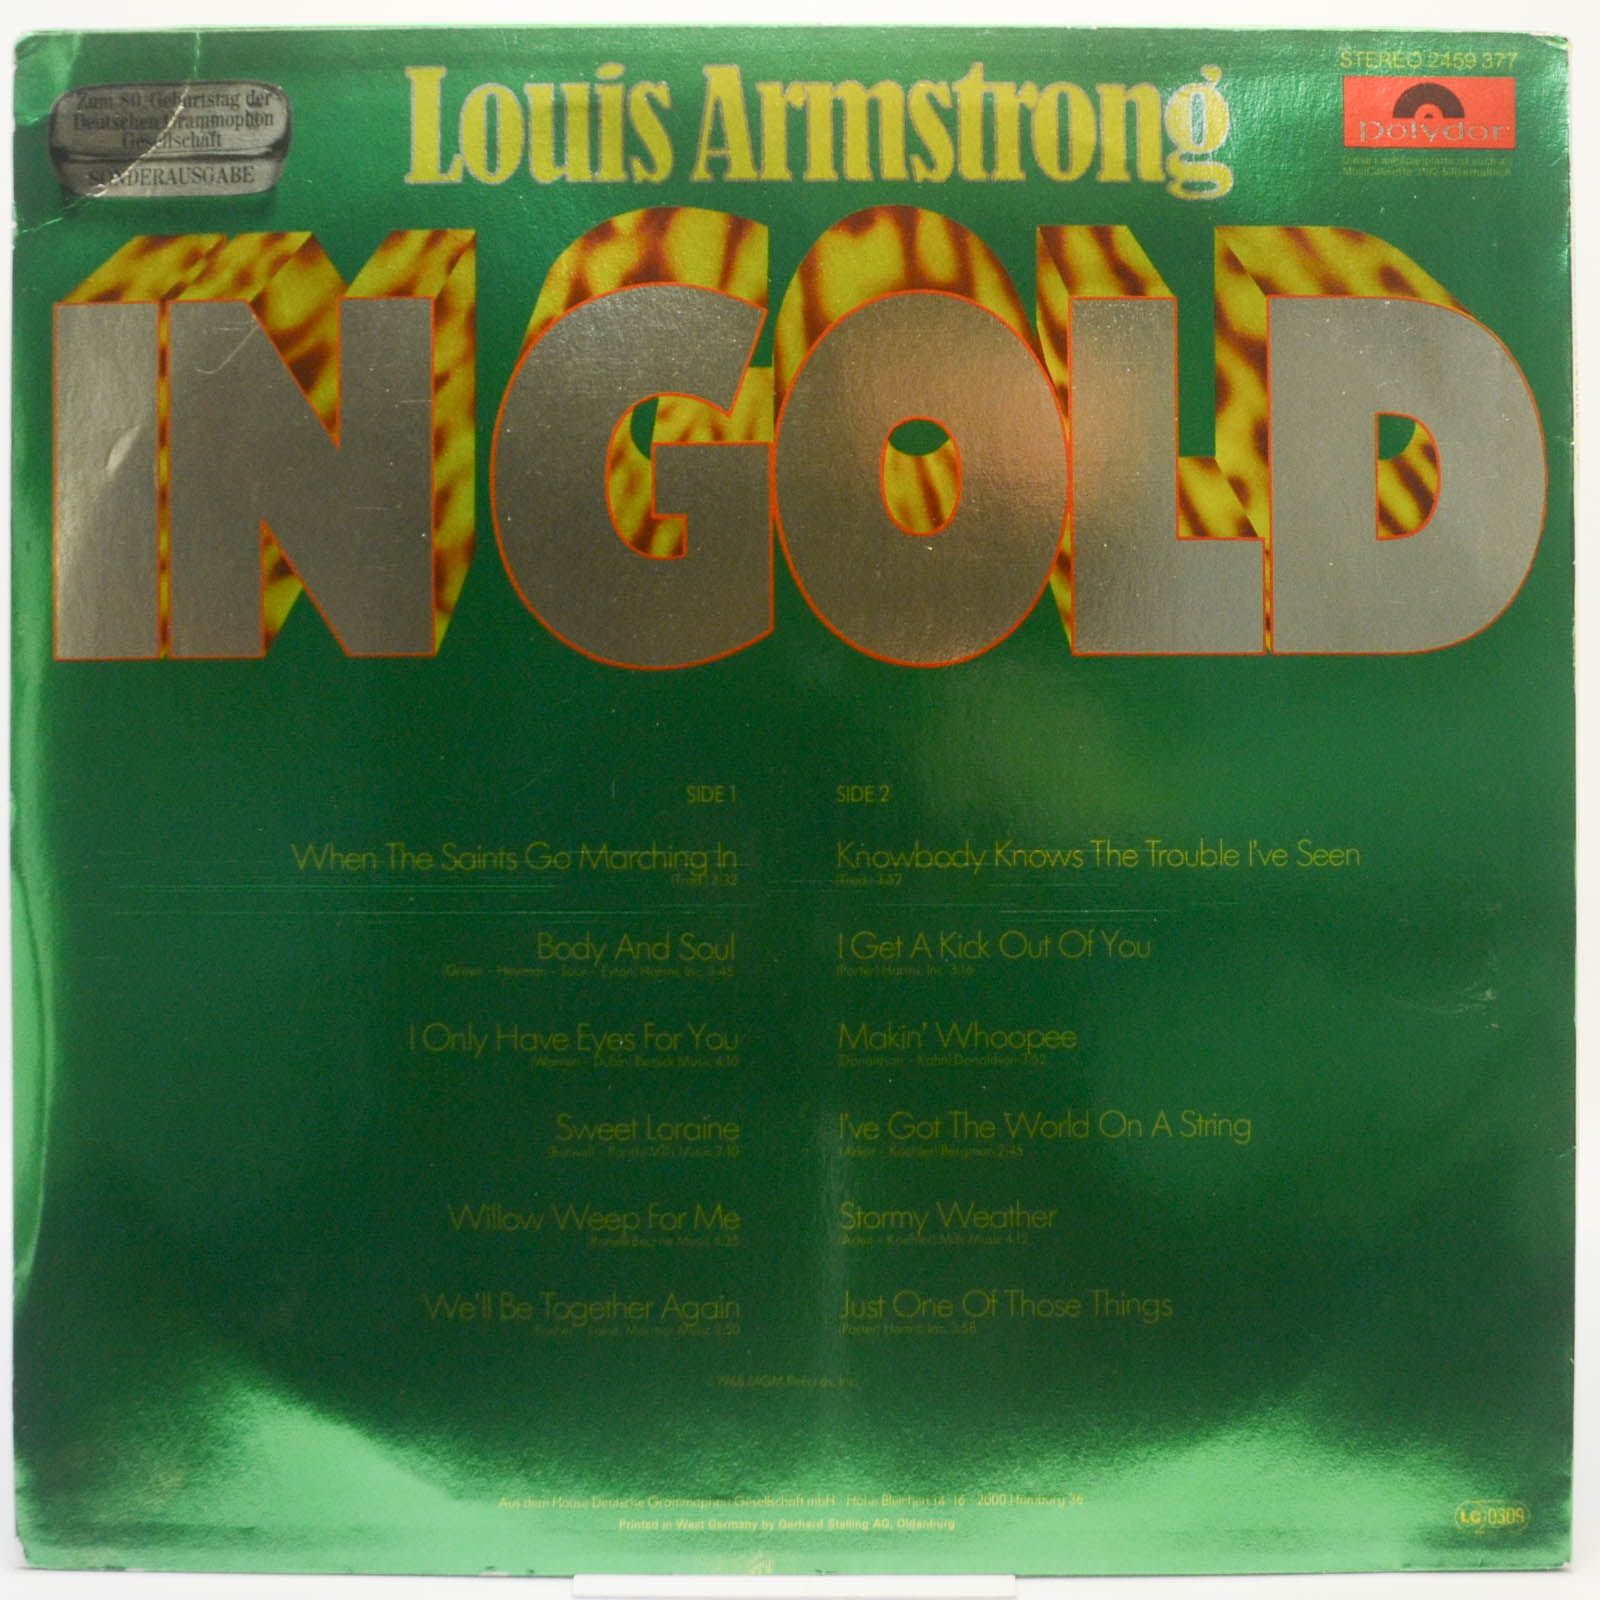 Louis Armstrong — In Gold, 1977